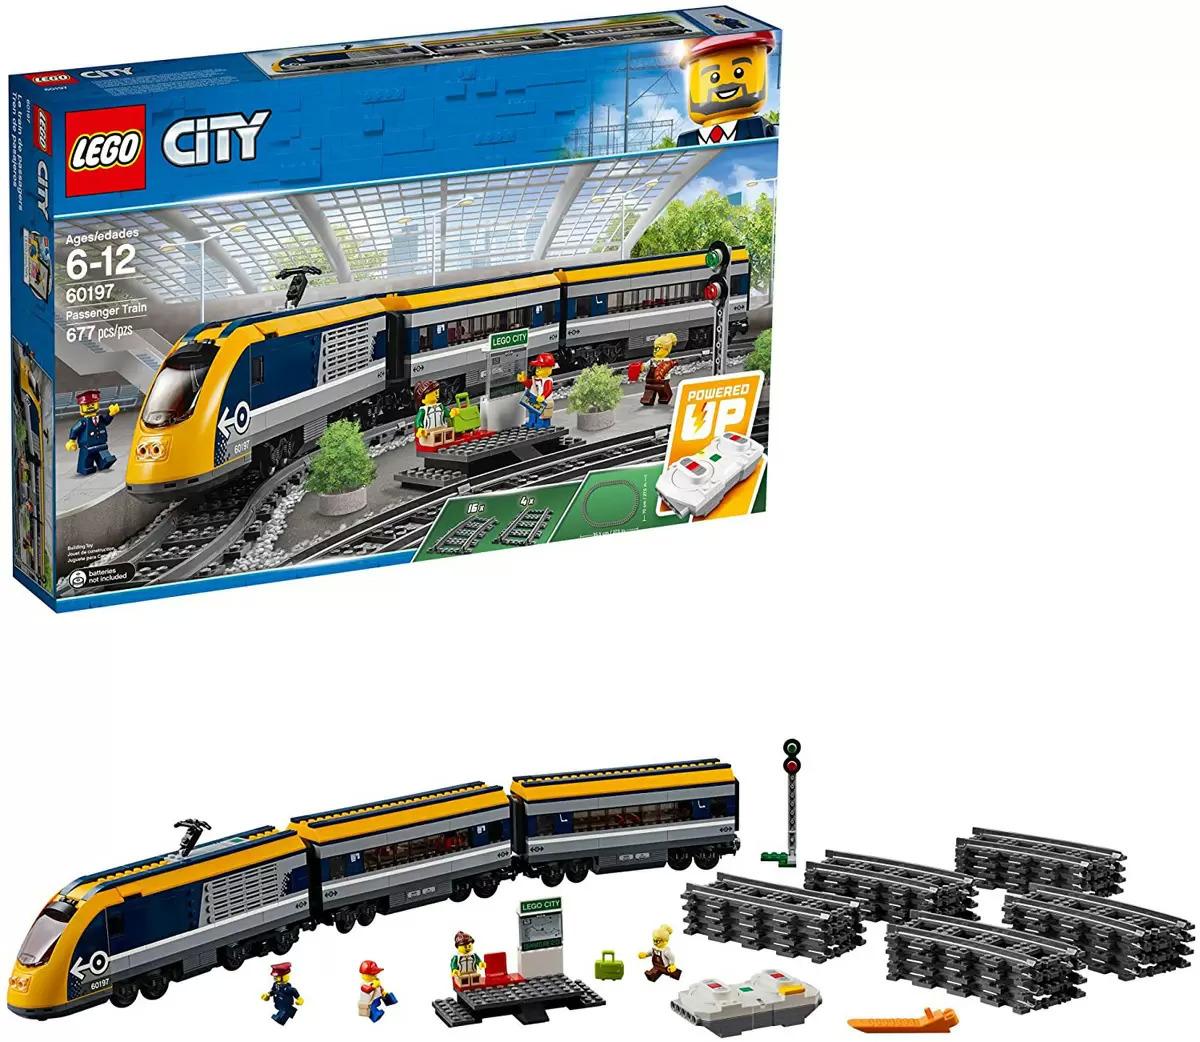 677-Piece Lego City Passenger Train Building Kit for $130 Shipped